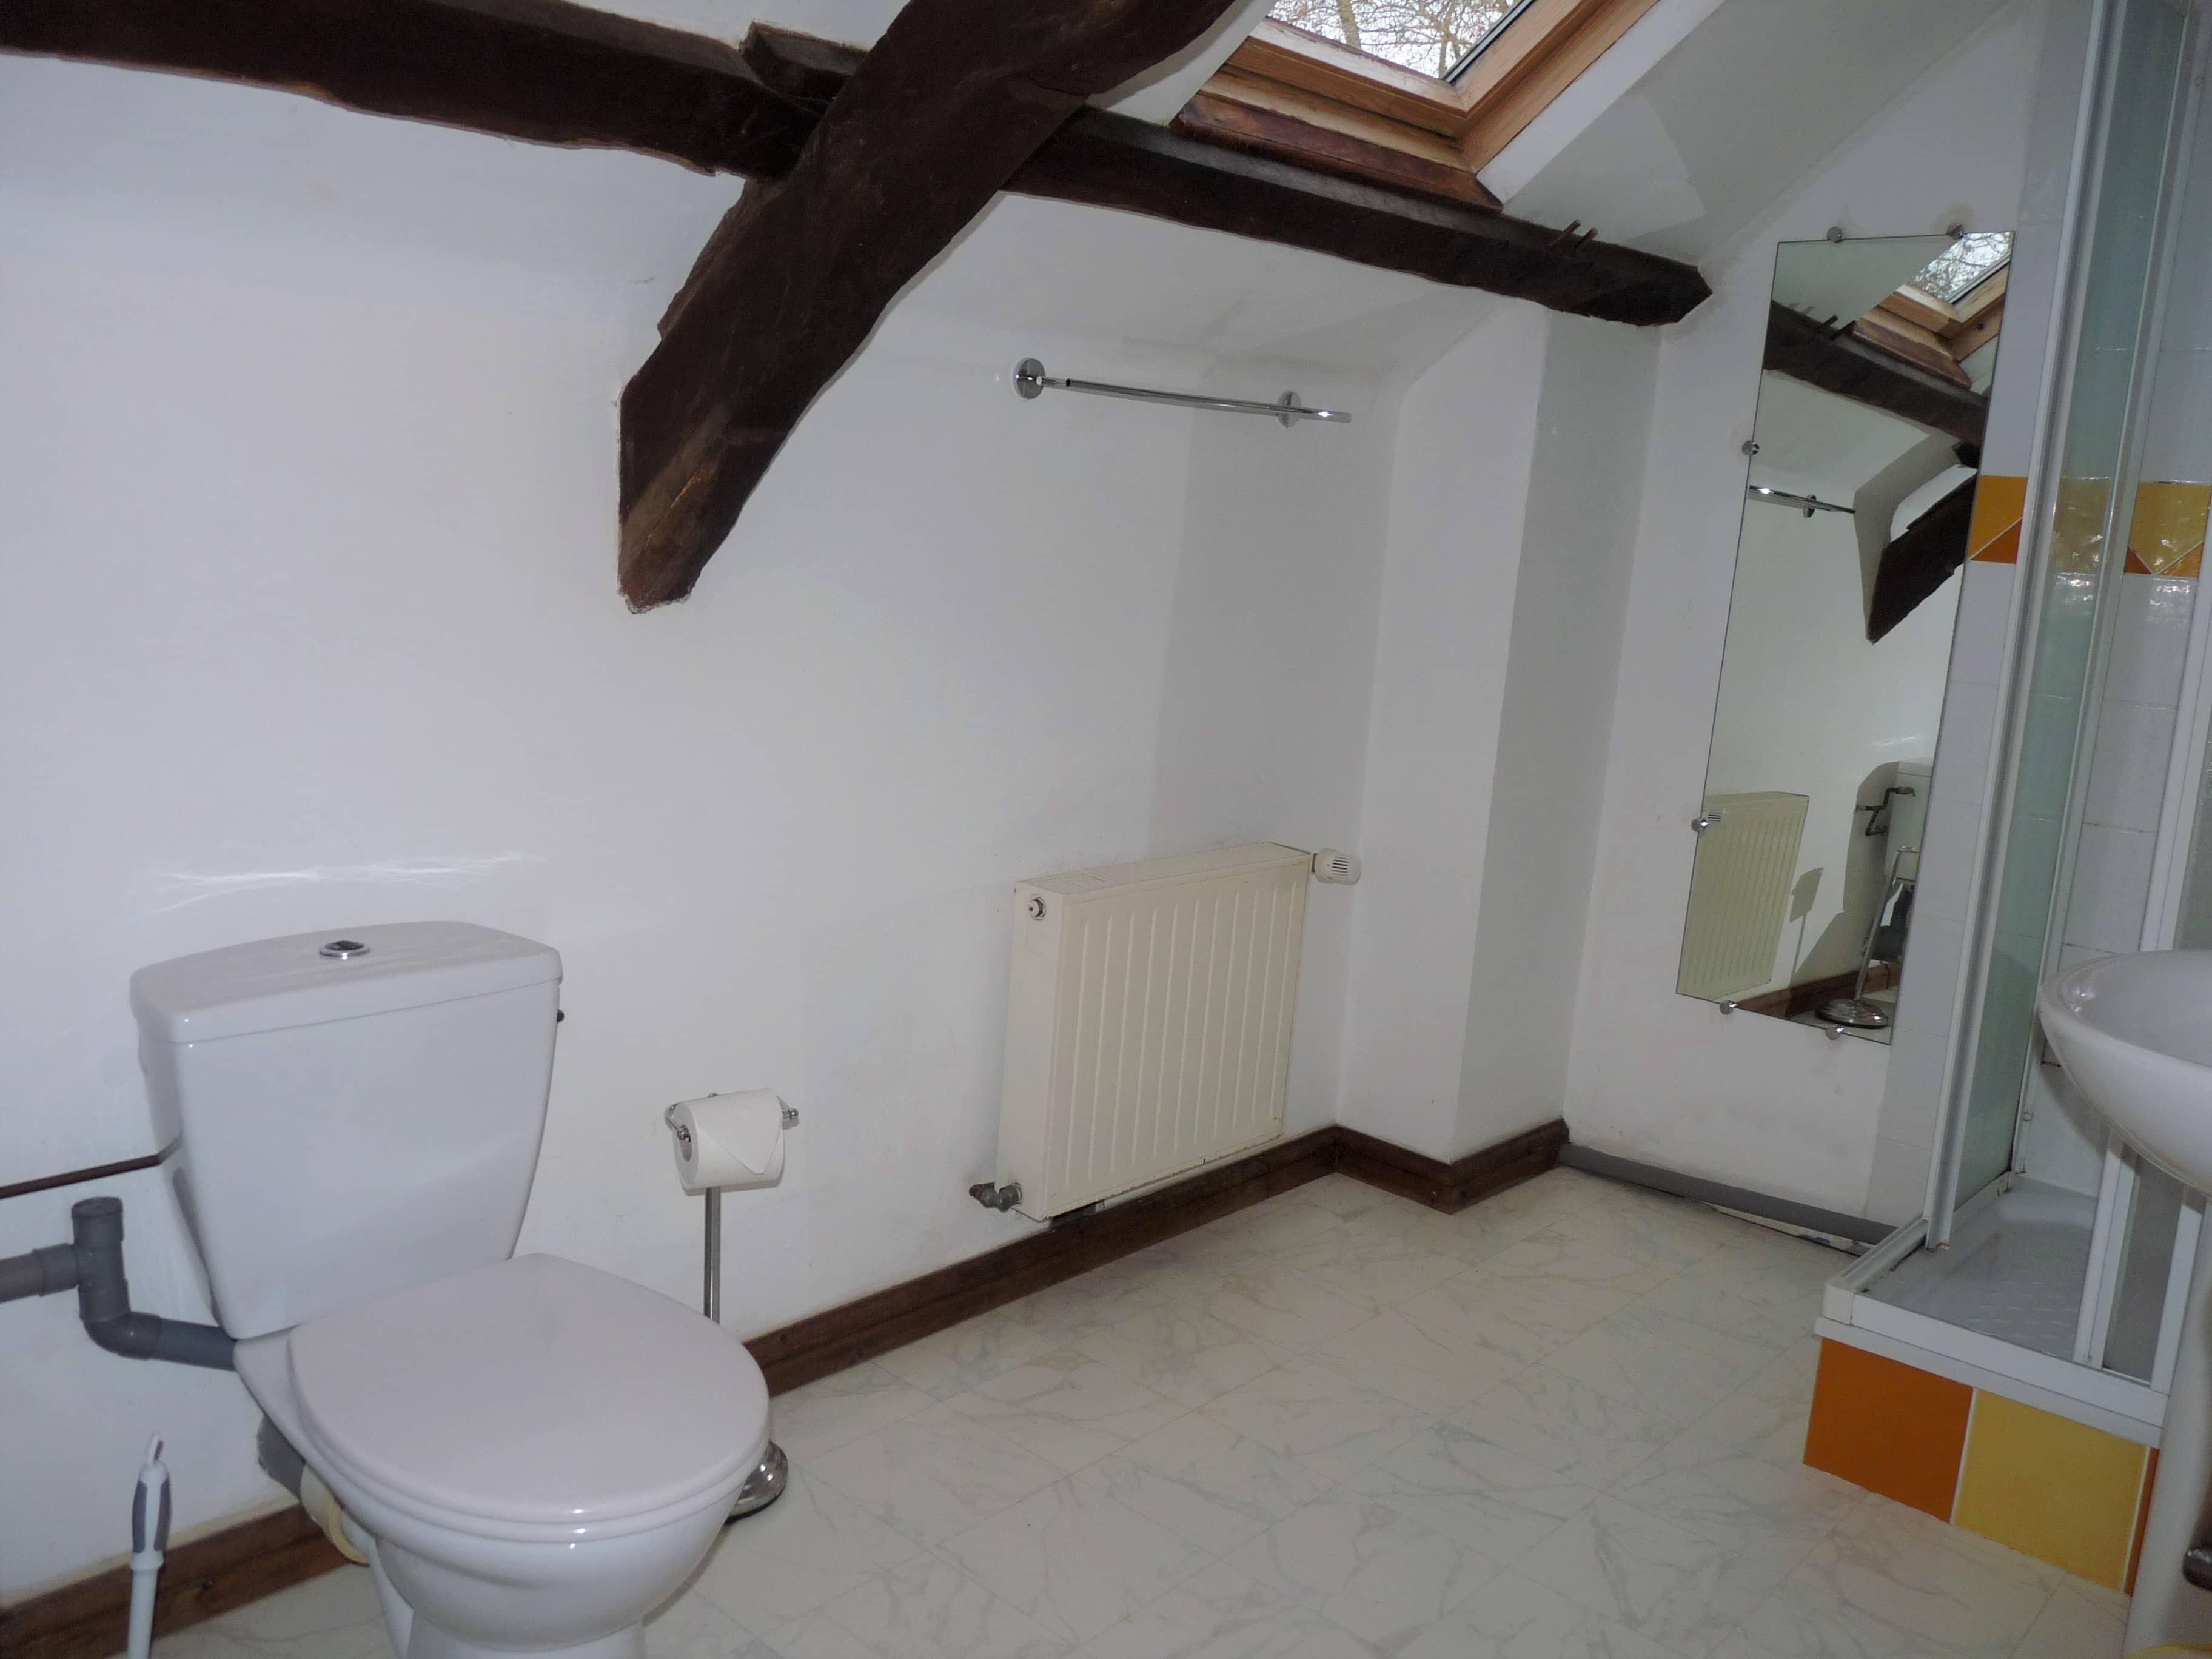 Clean and well-appointed toilet of La Julerie cottage in Brittany, France, with a ceramic sink, tiled walls, soft lighting, and modern decoration. Perfect for a comfortable and pleasant toilet experience.